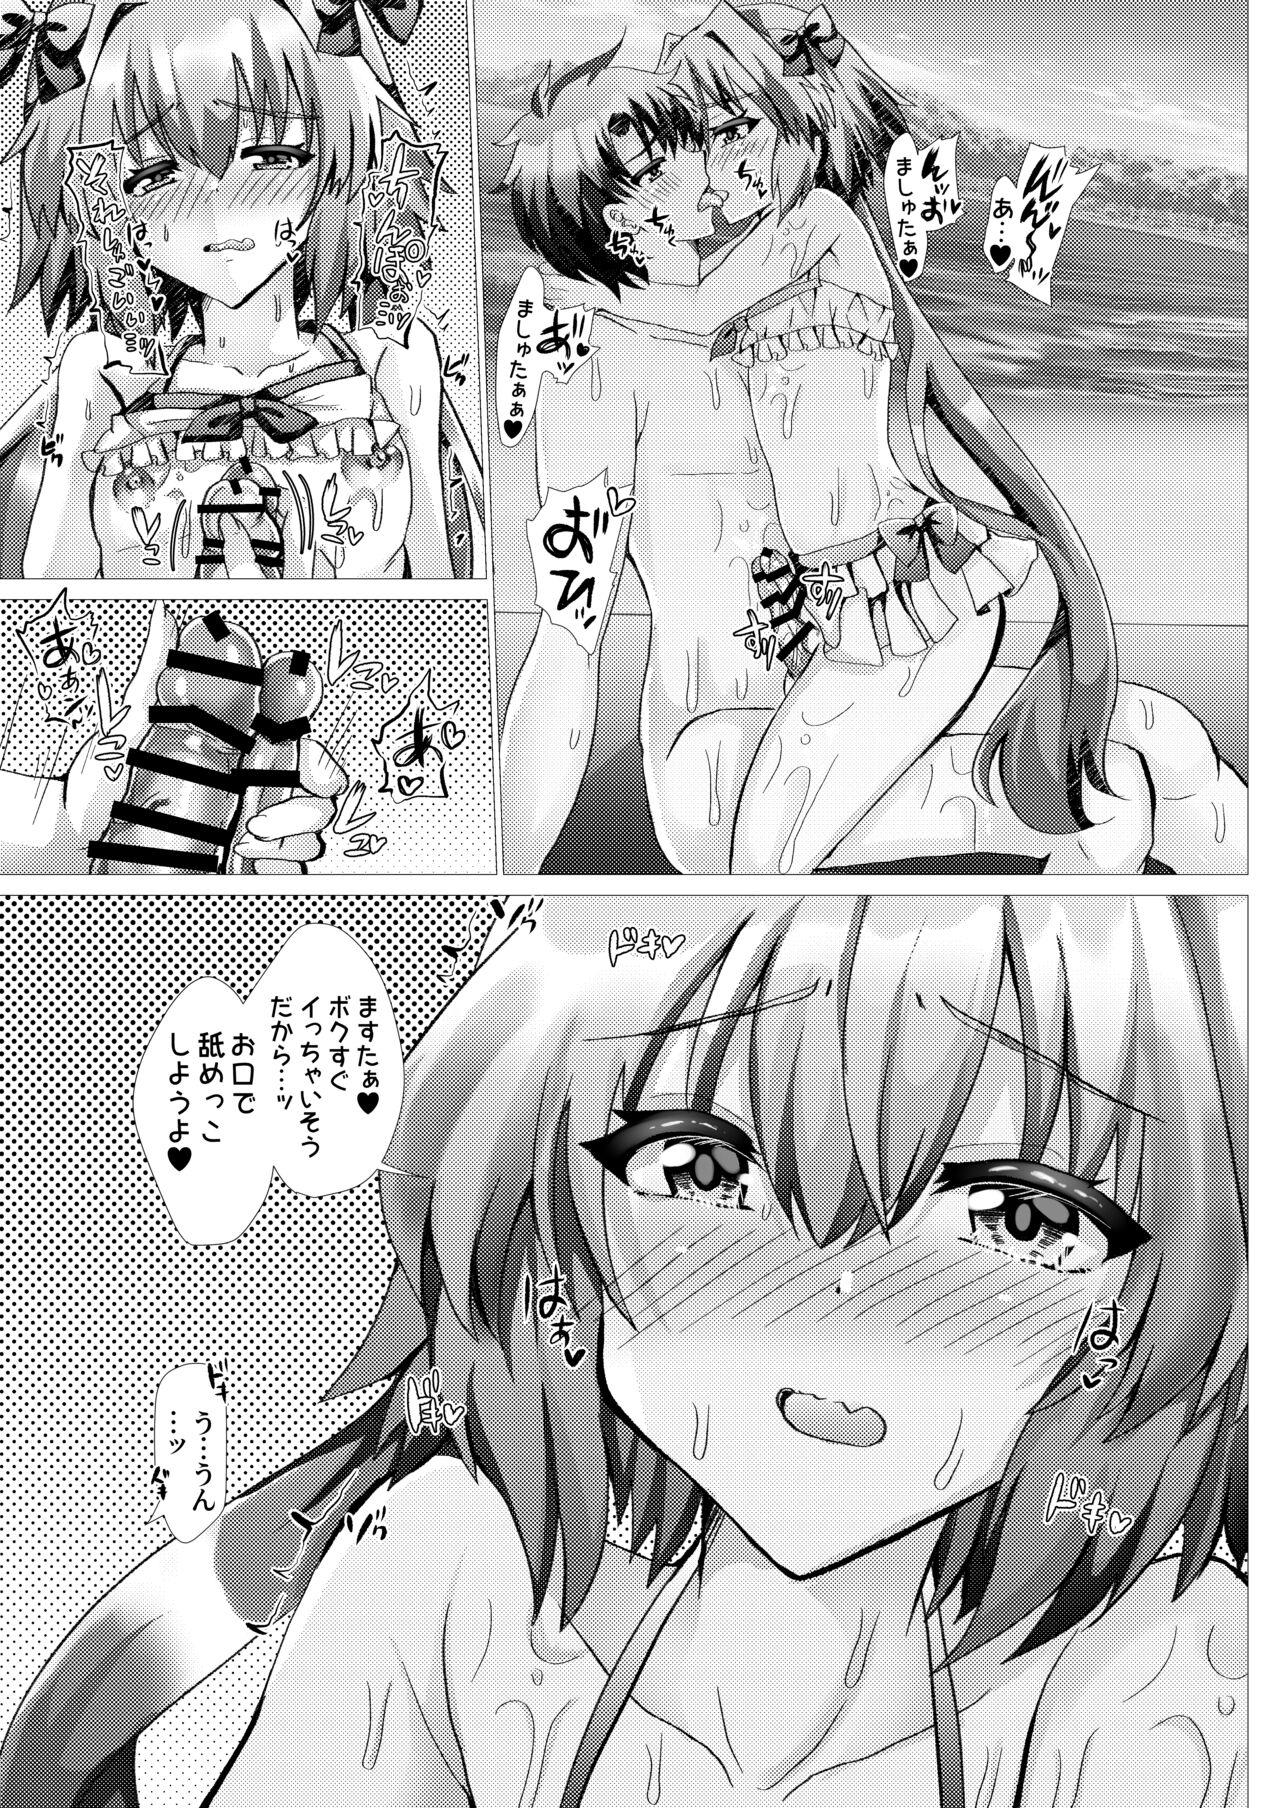 Motel Astolfo to Summer Vacation + Omake - Fate grand order Plump - Page 10